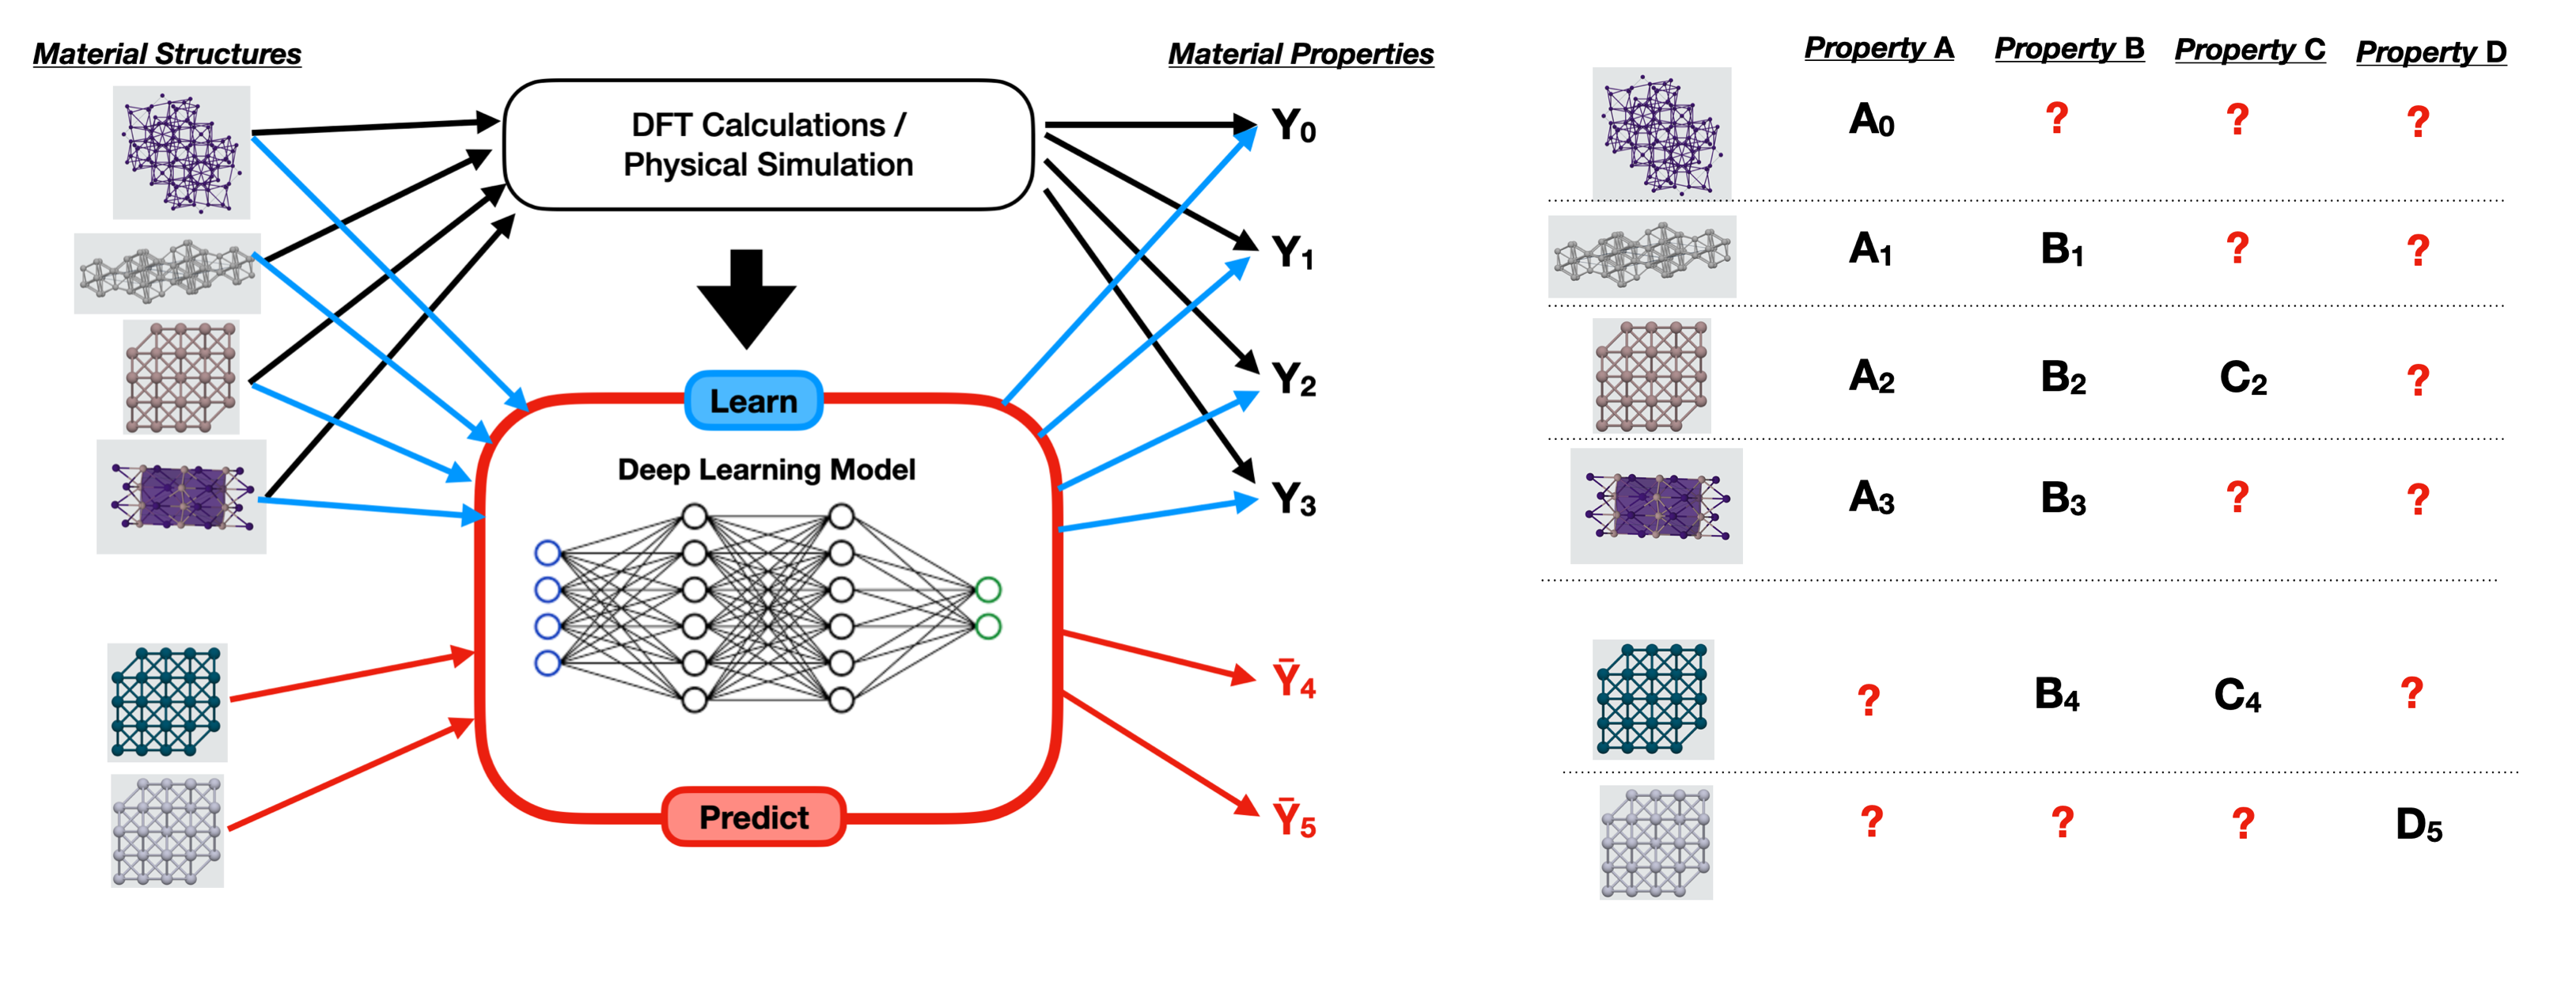 Machine Learning Model for Materials Property Prediction & Multi-task Learning